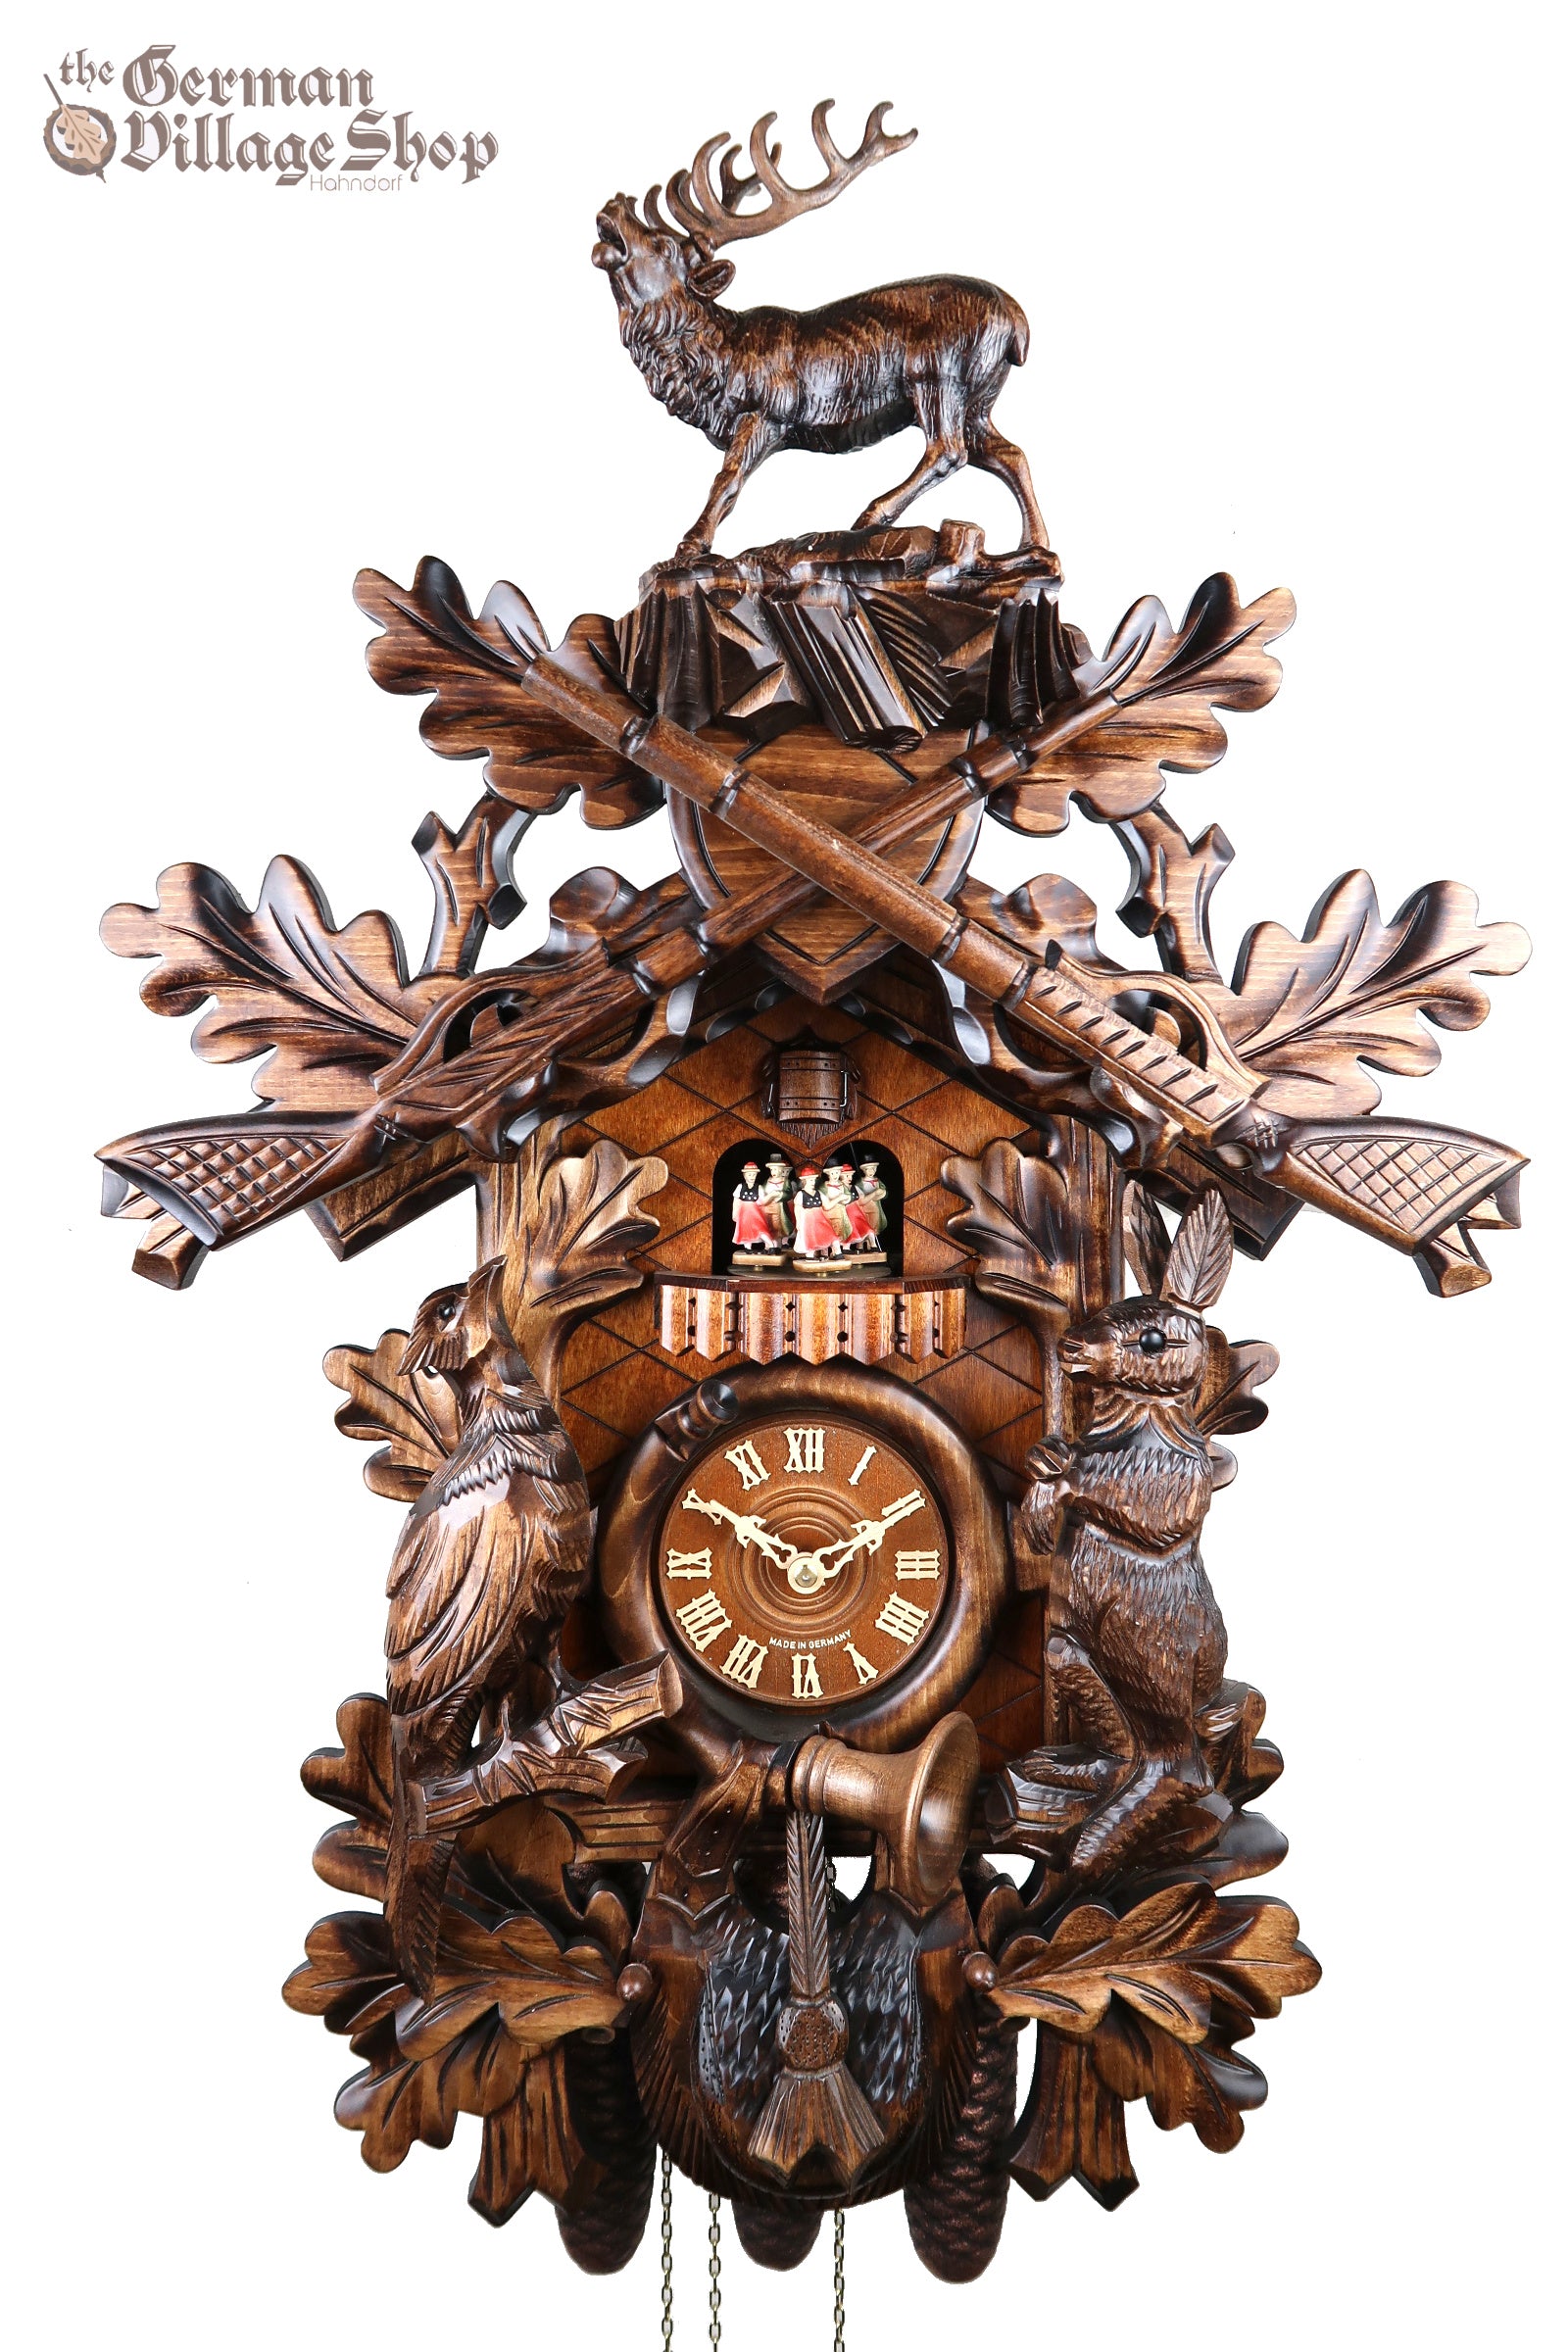 Hones cuckoo clock The Black Forest Germany Wooden Carving stag and hunting scene